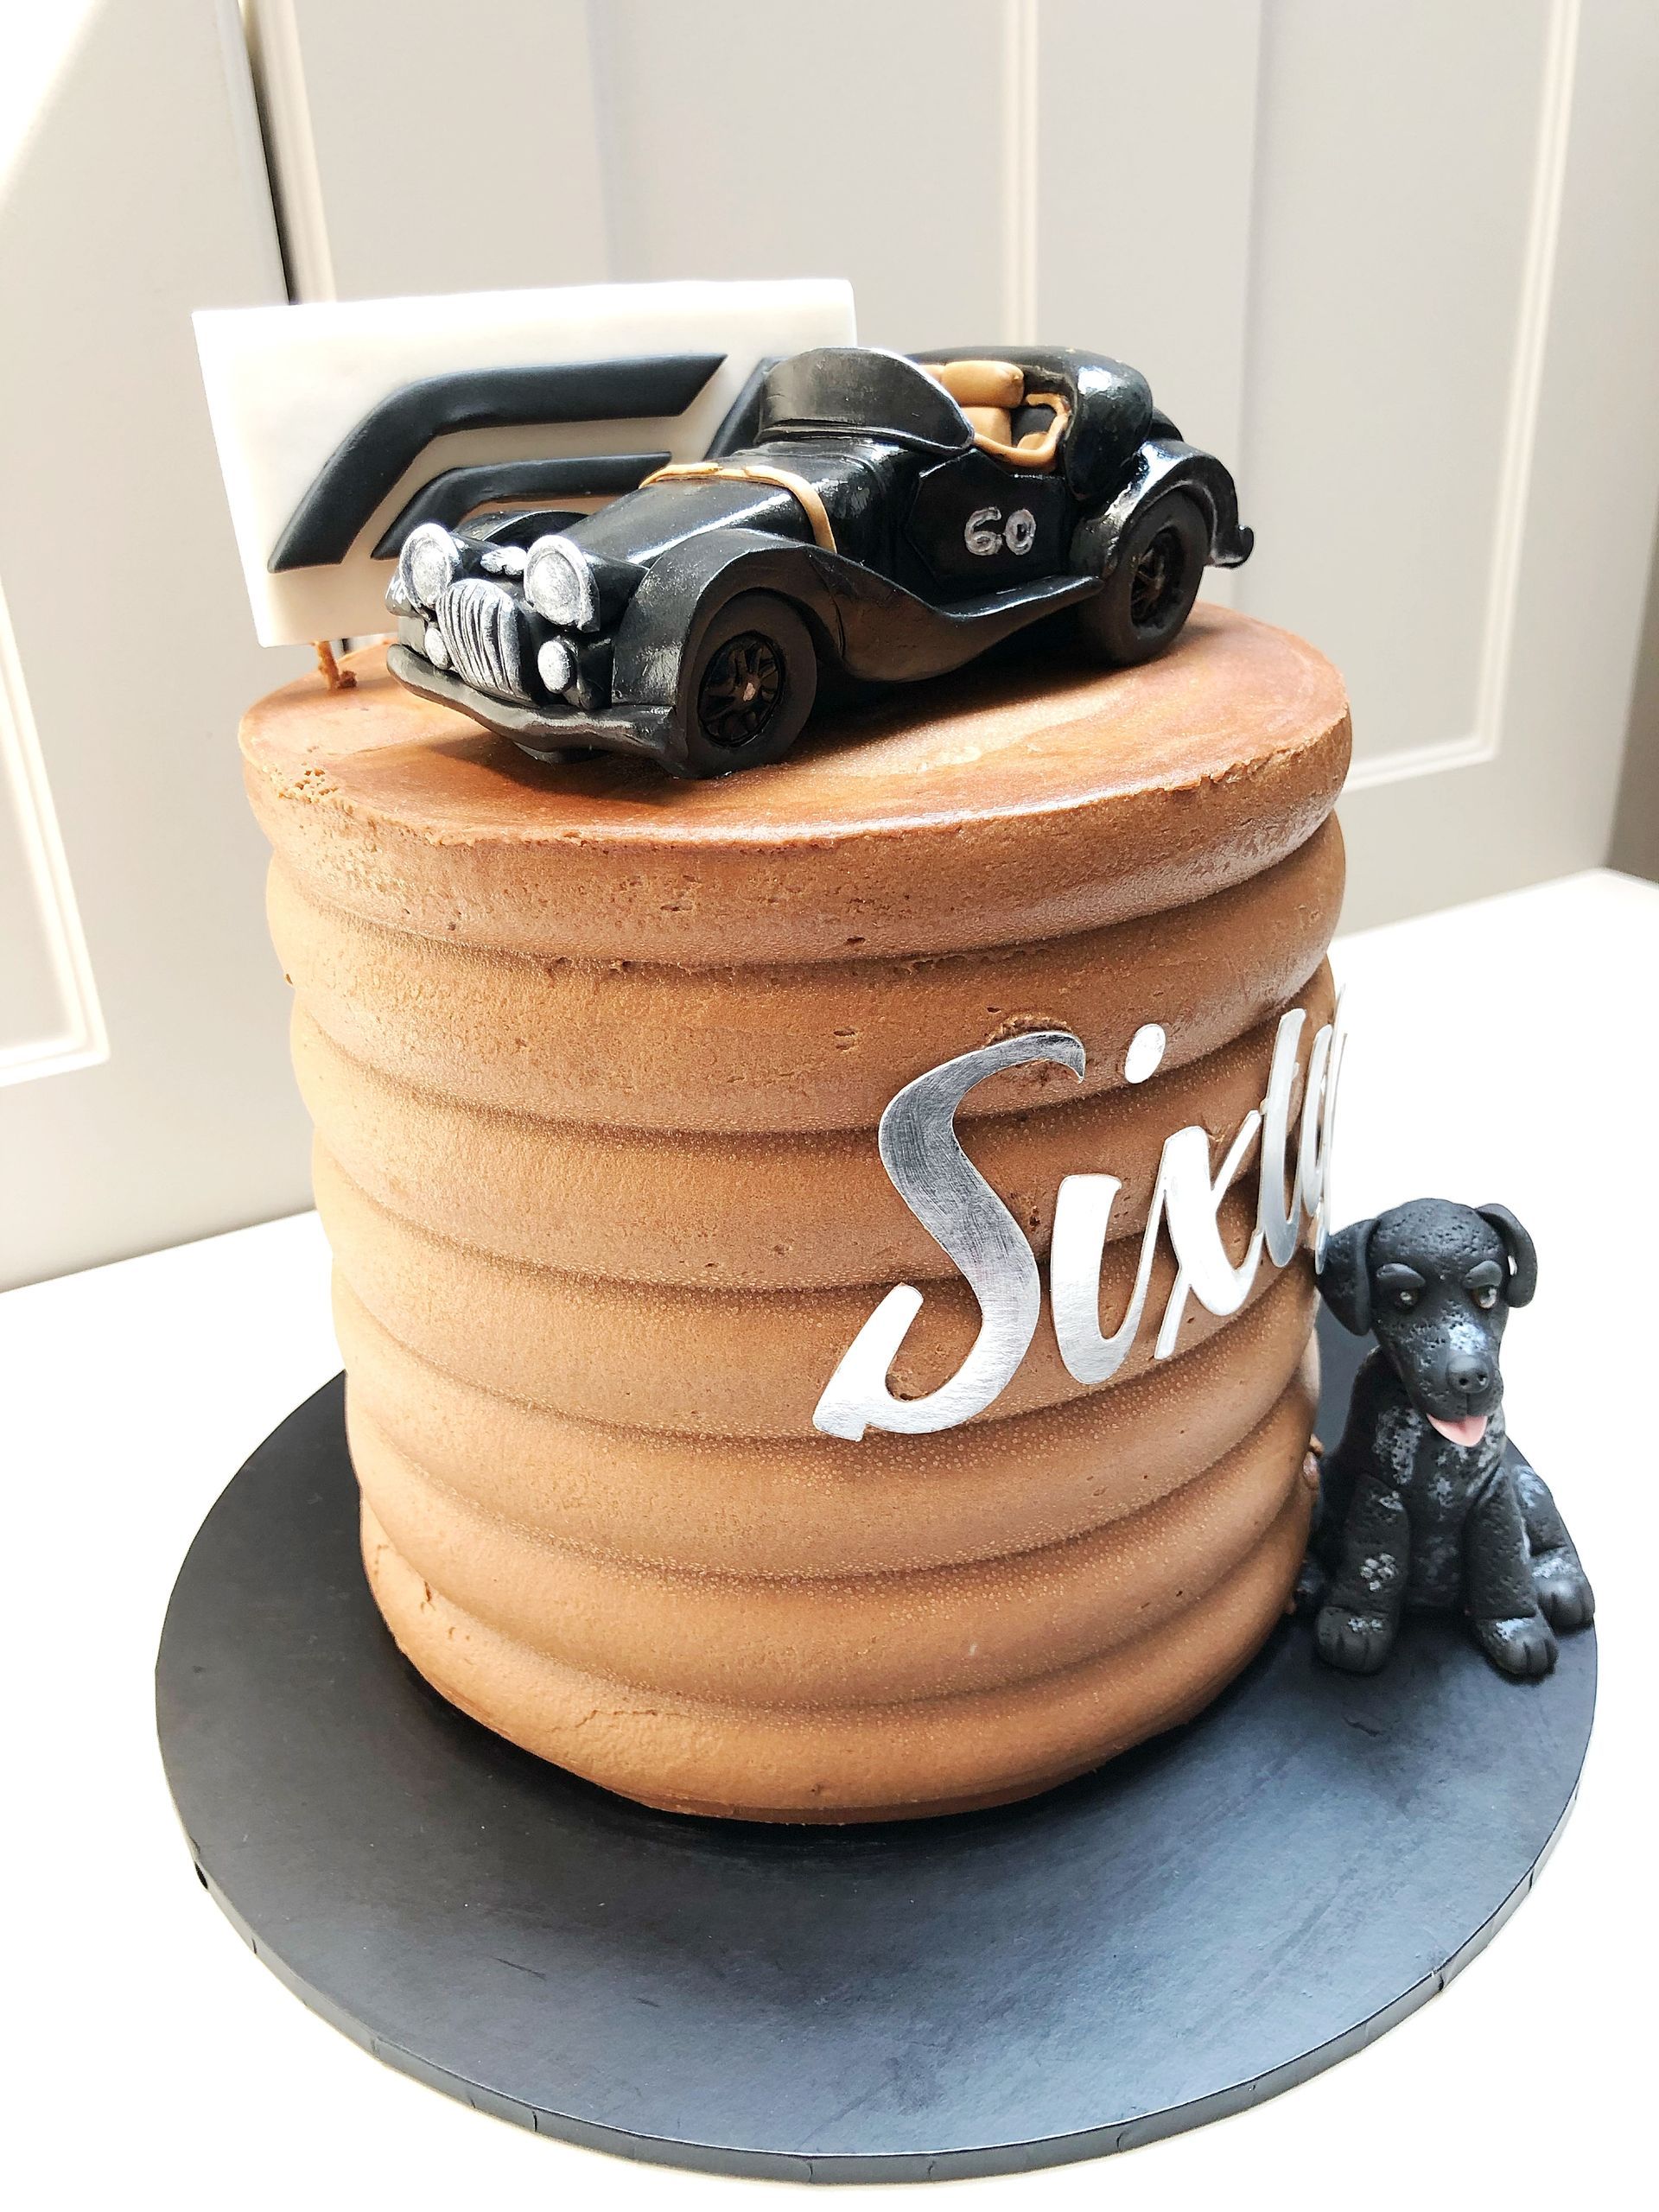 Chocolate cake with F1 logo, fondant Morgan Plus 4 car and dog to decorate the cake. Silver 